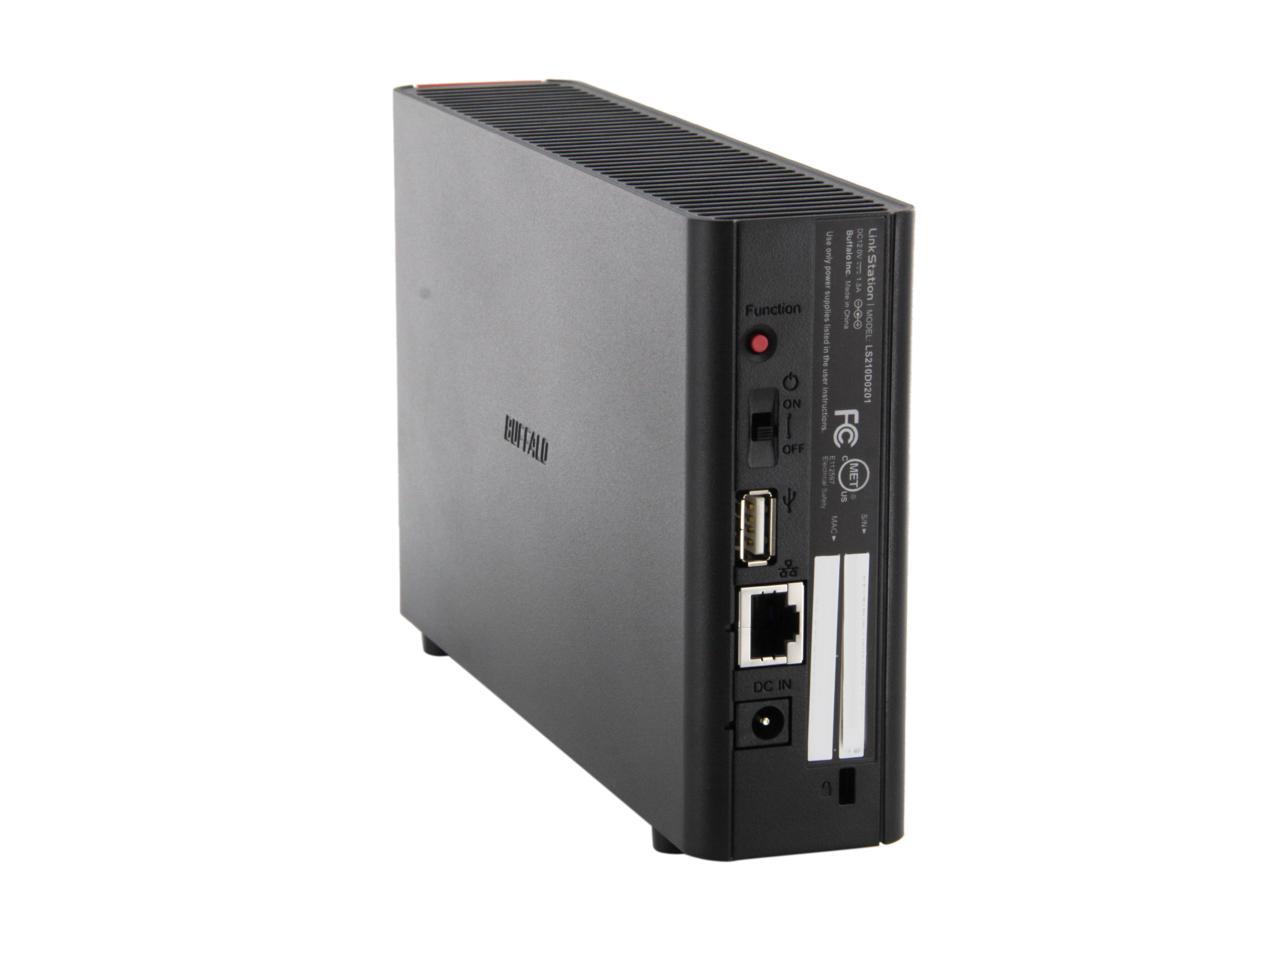 LinkStation 210 2TB Personal Cloud Storage with Hard Drives 